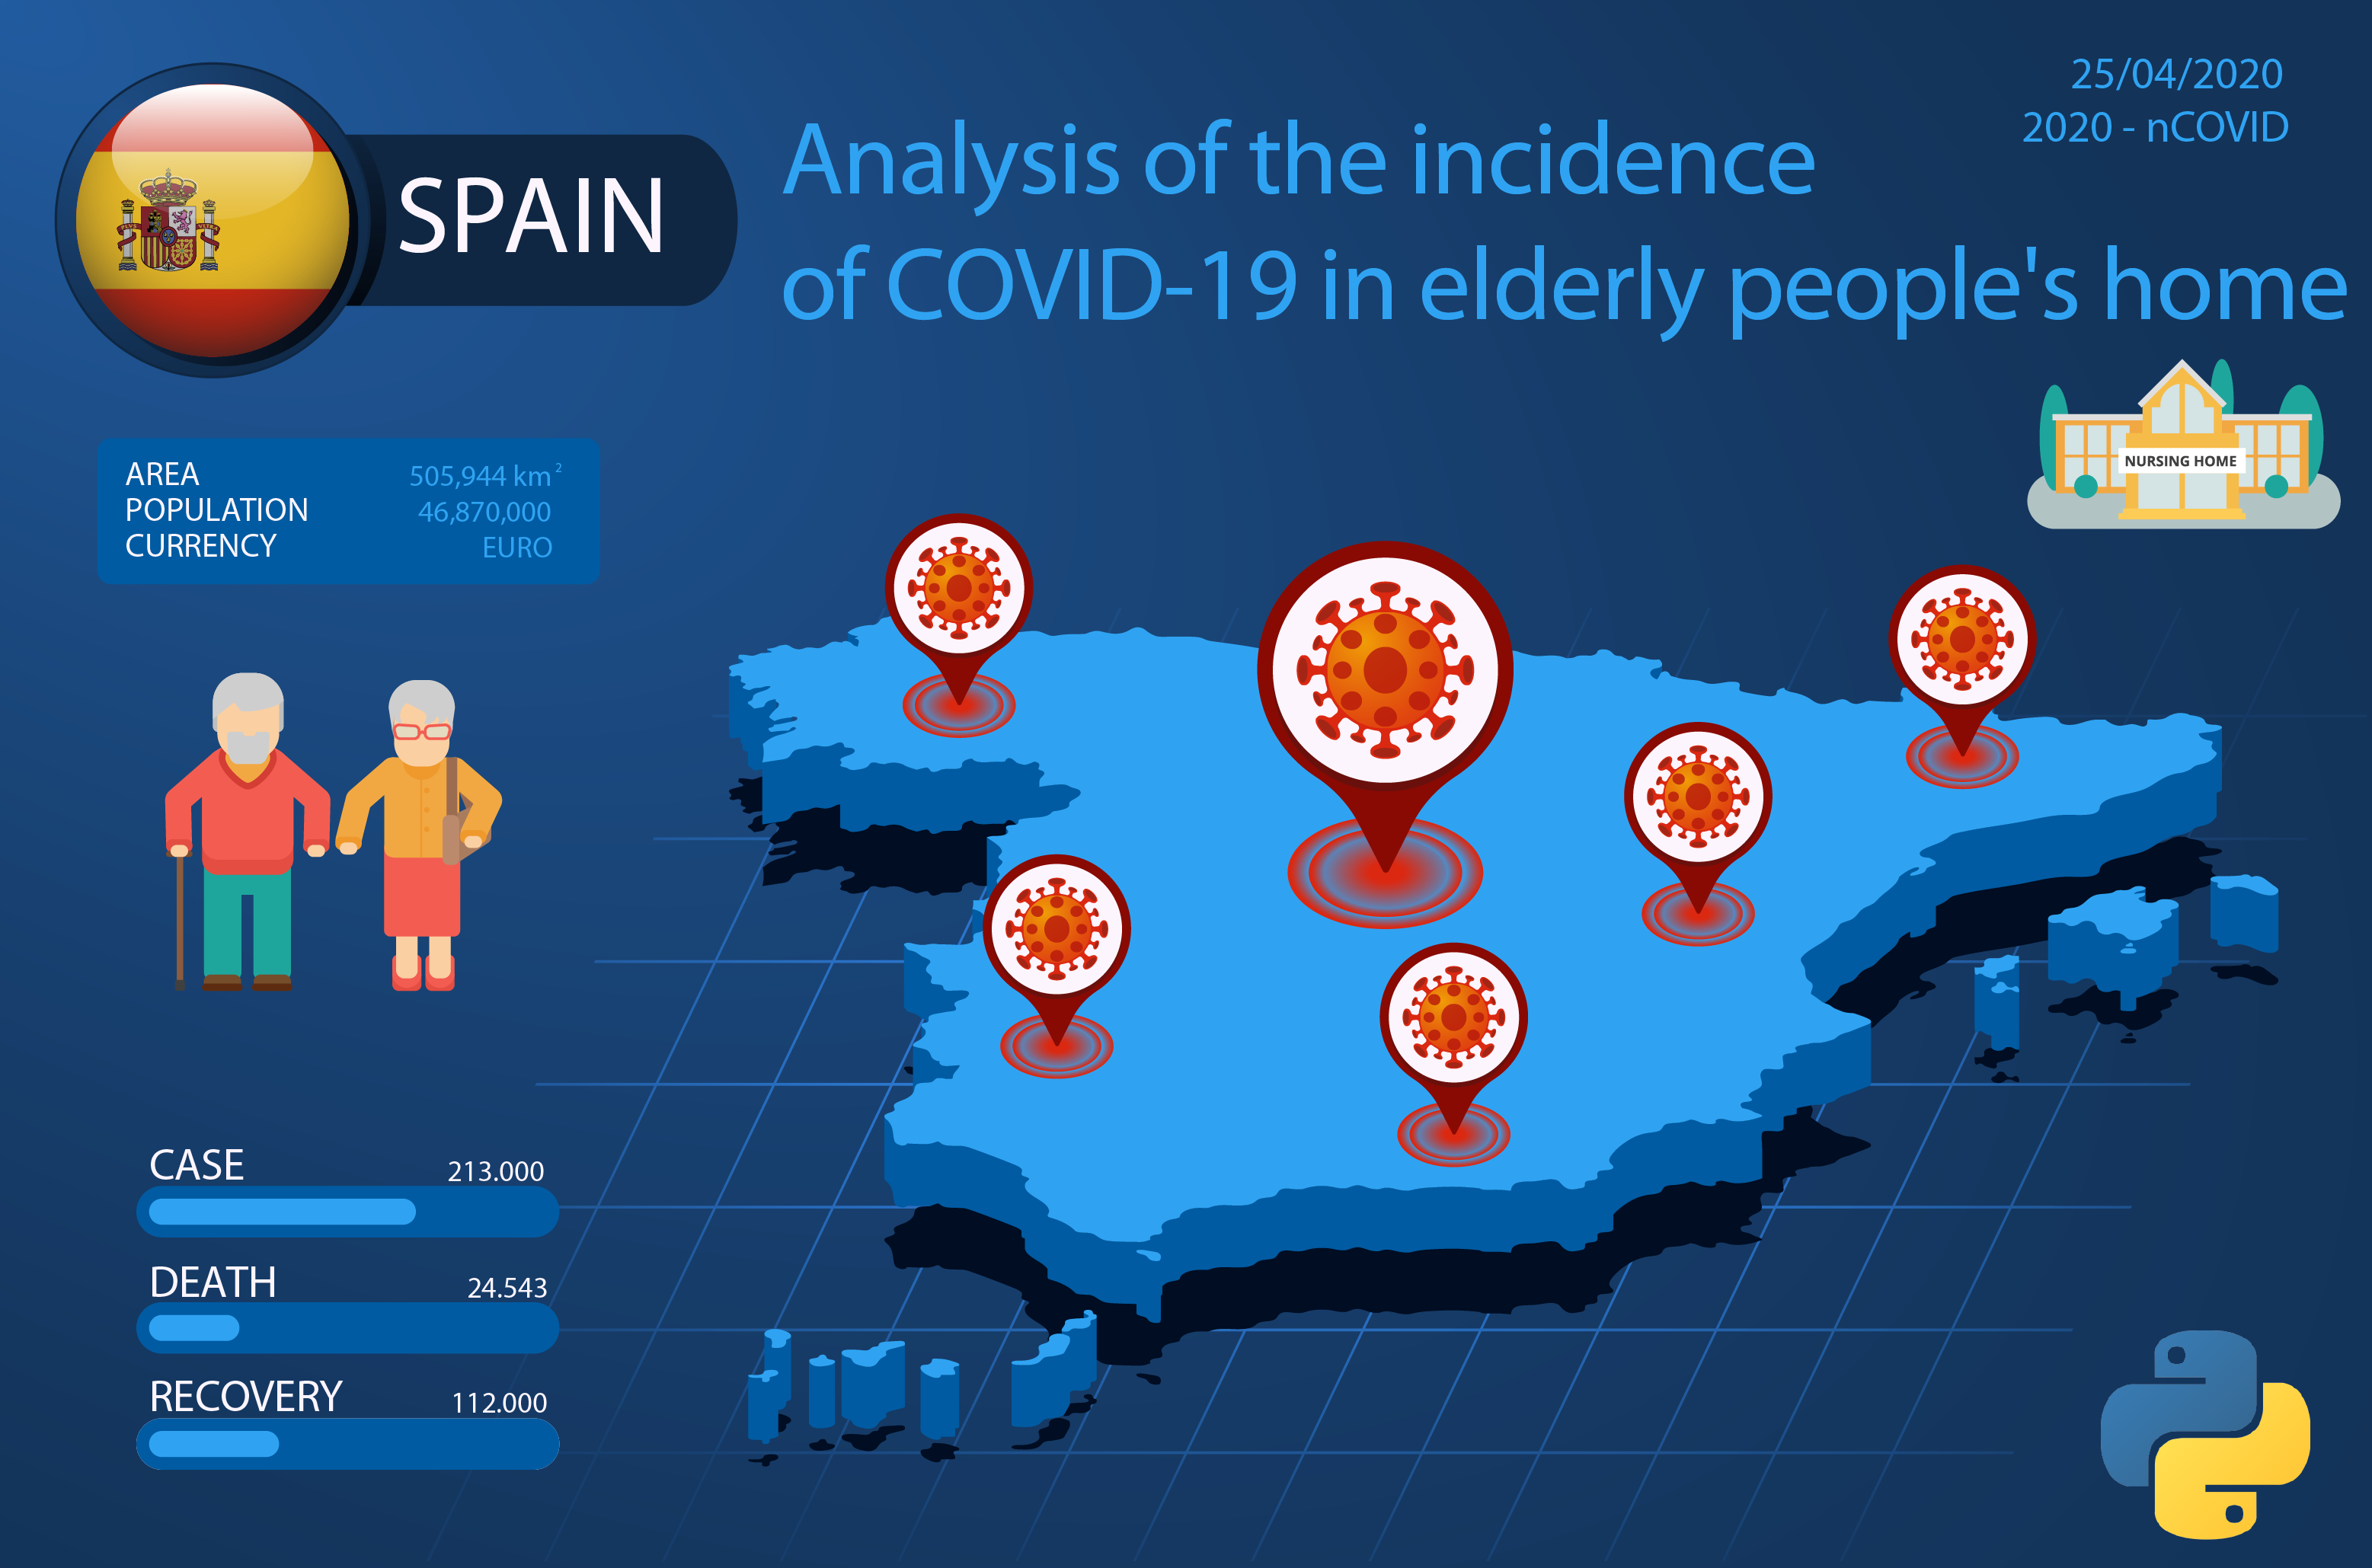 Analysis of the incidence of COVID-19 in elderly people's home